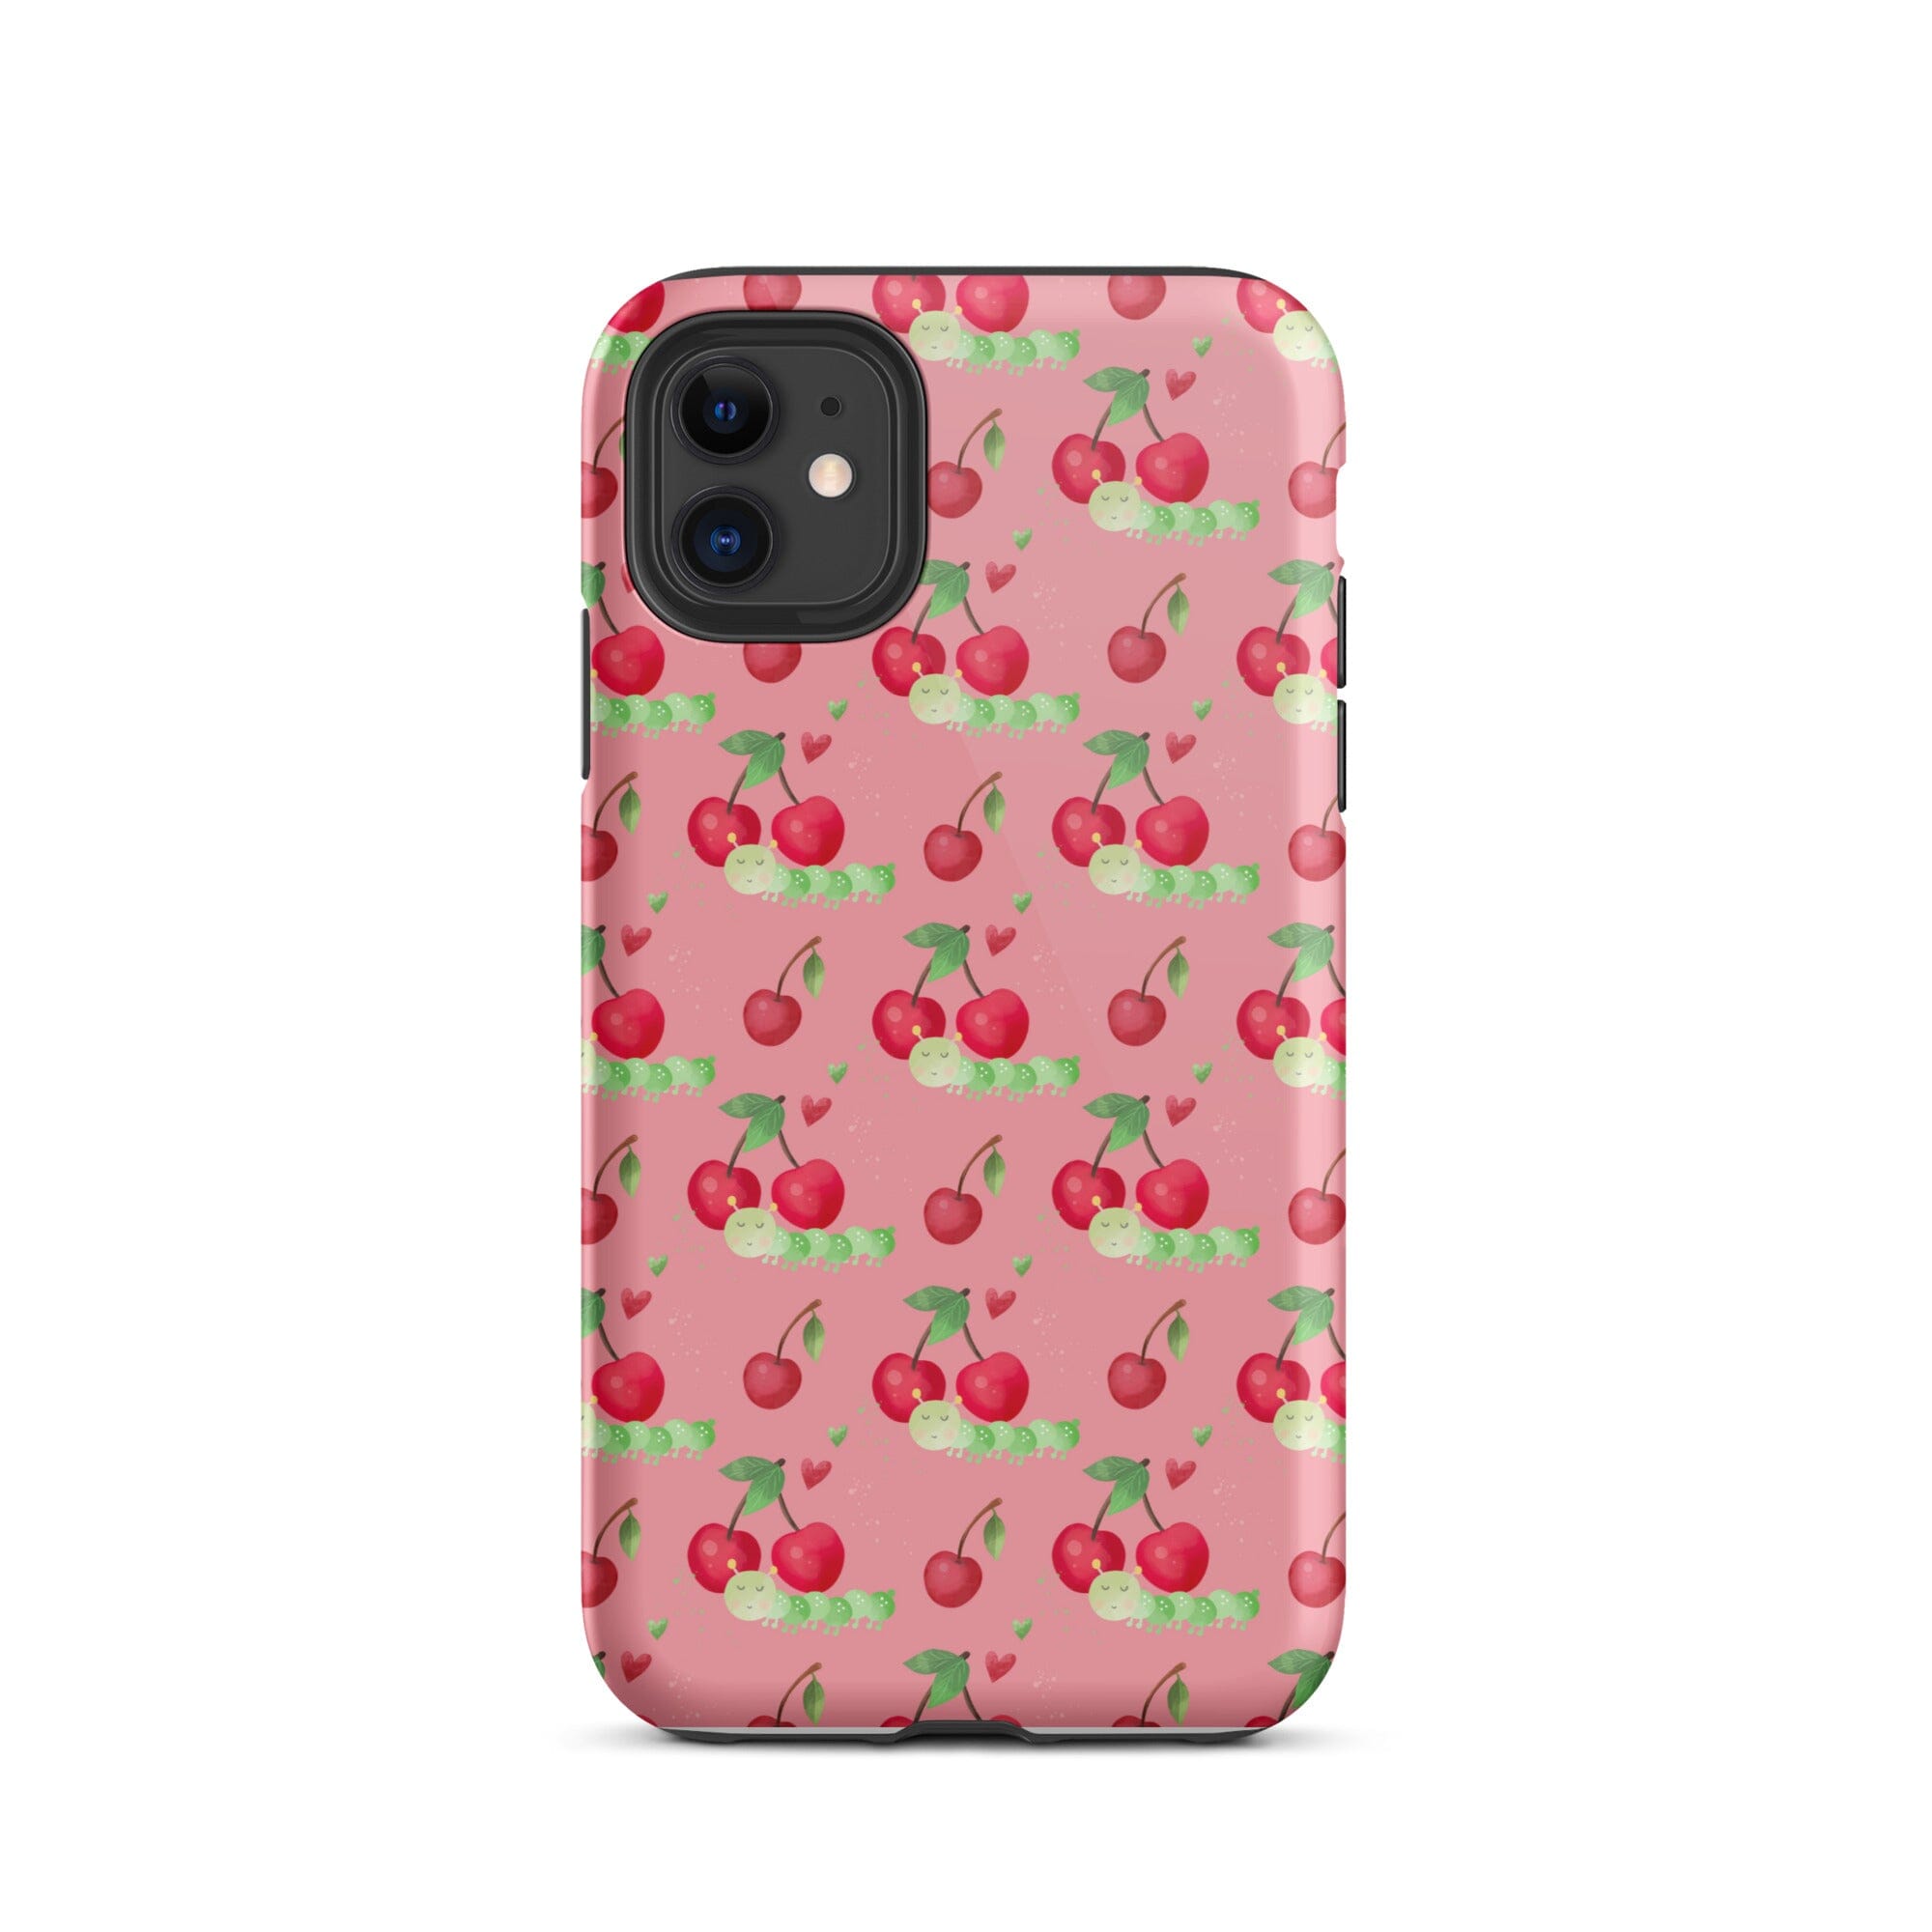 Cherries iPhone Case - KBB Exclusive Knitted Belle Boutique iPhone 11 